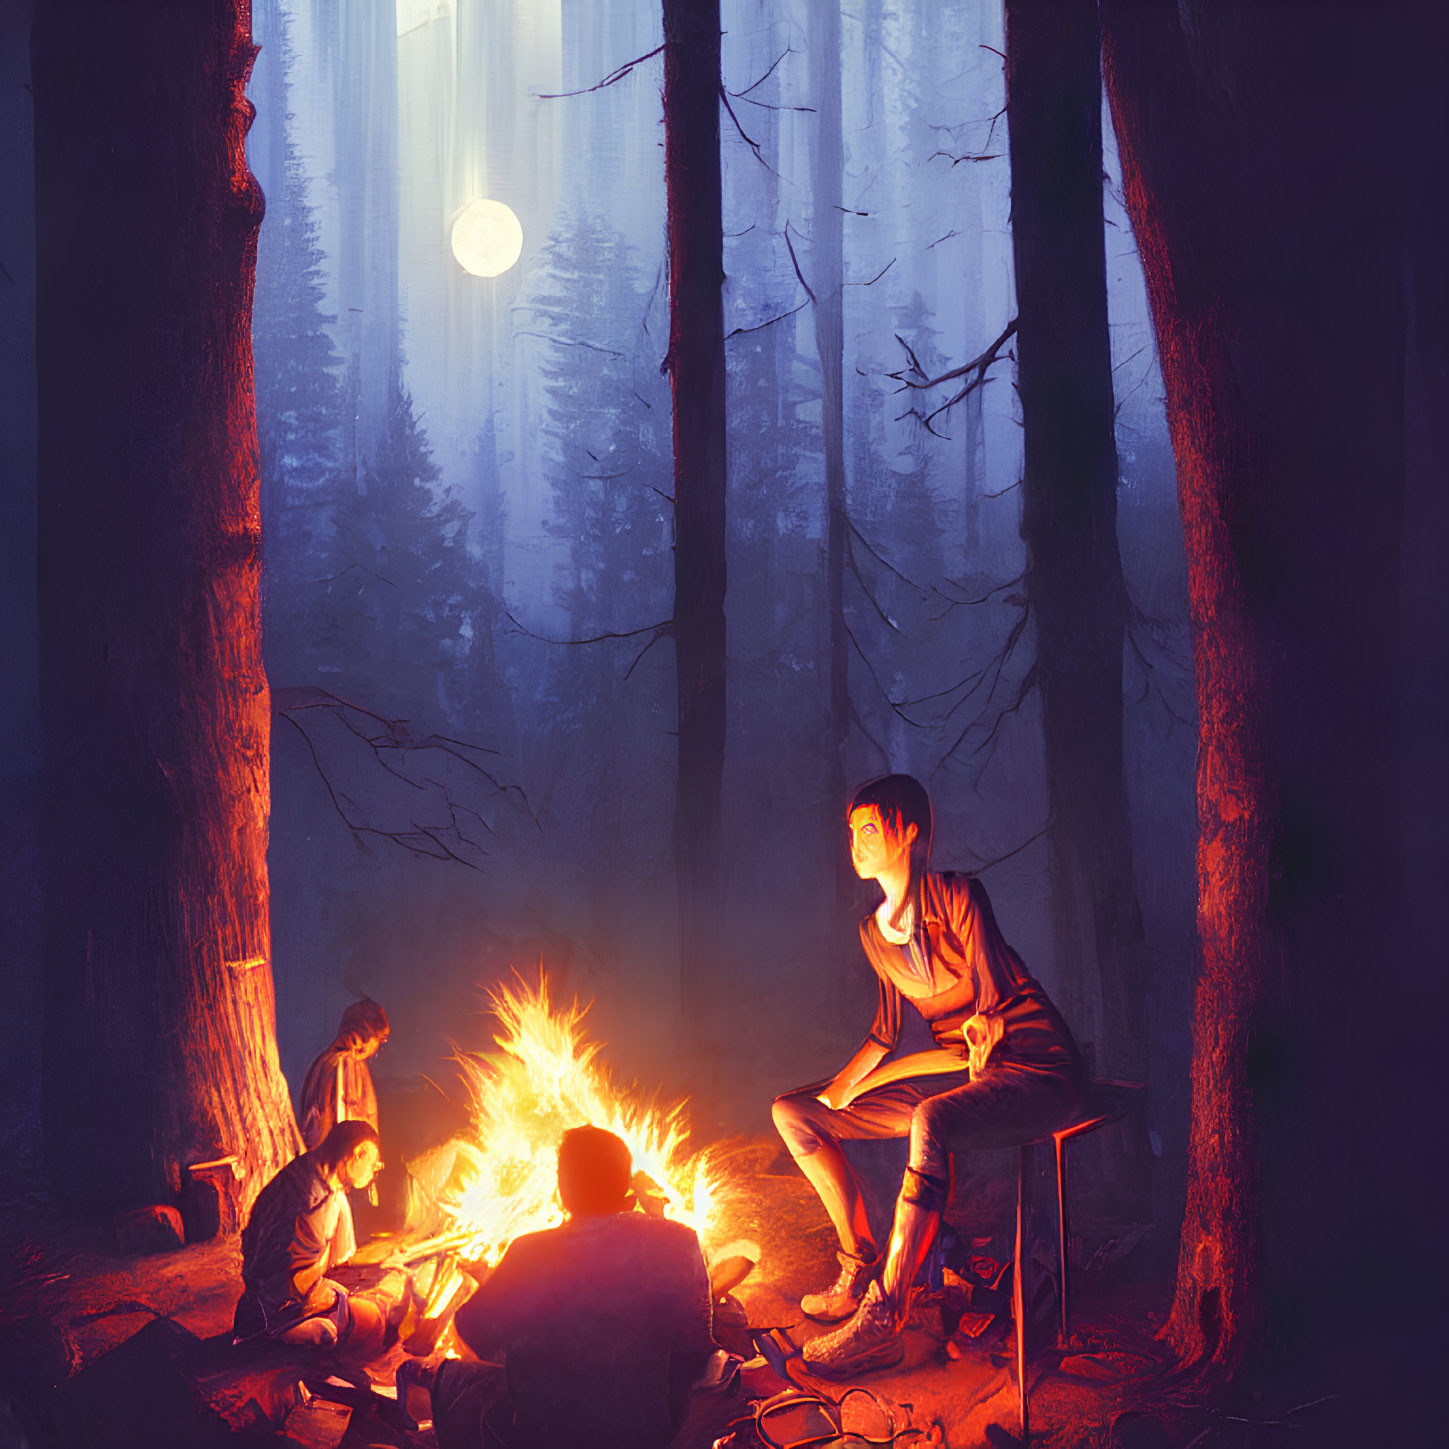 Nighttime forest scene with individuals by campfire under full moon